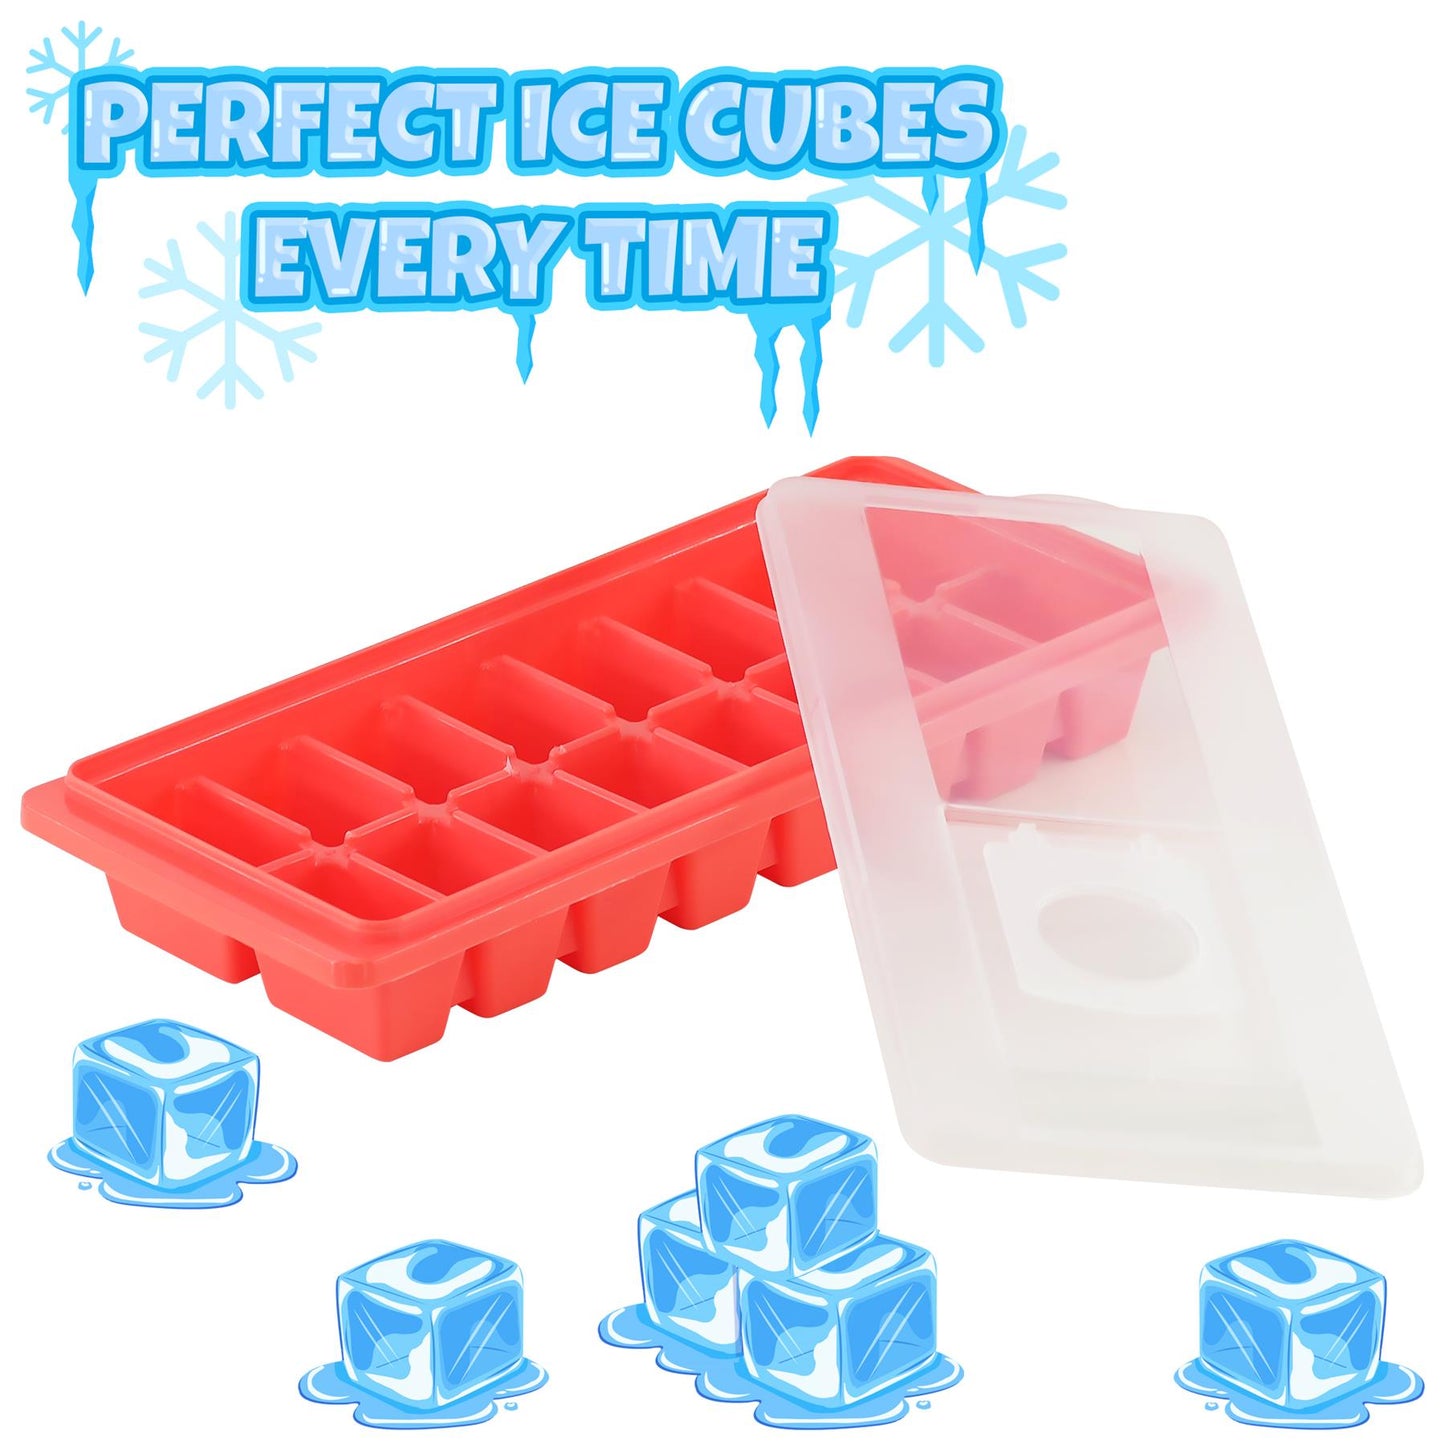 16 Cubes Silicone Ice Cube Tray With Lid by GEEZY - UKBuyZone